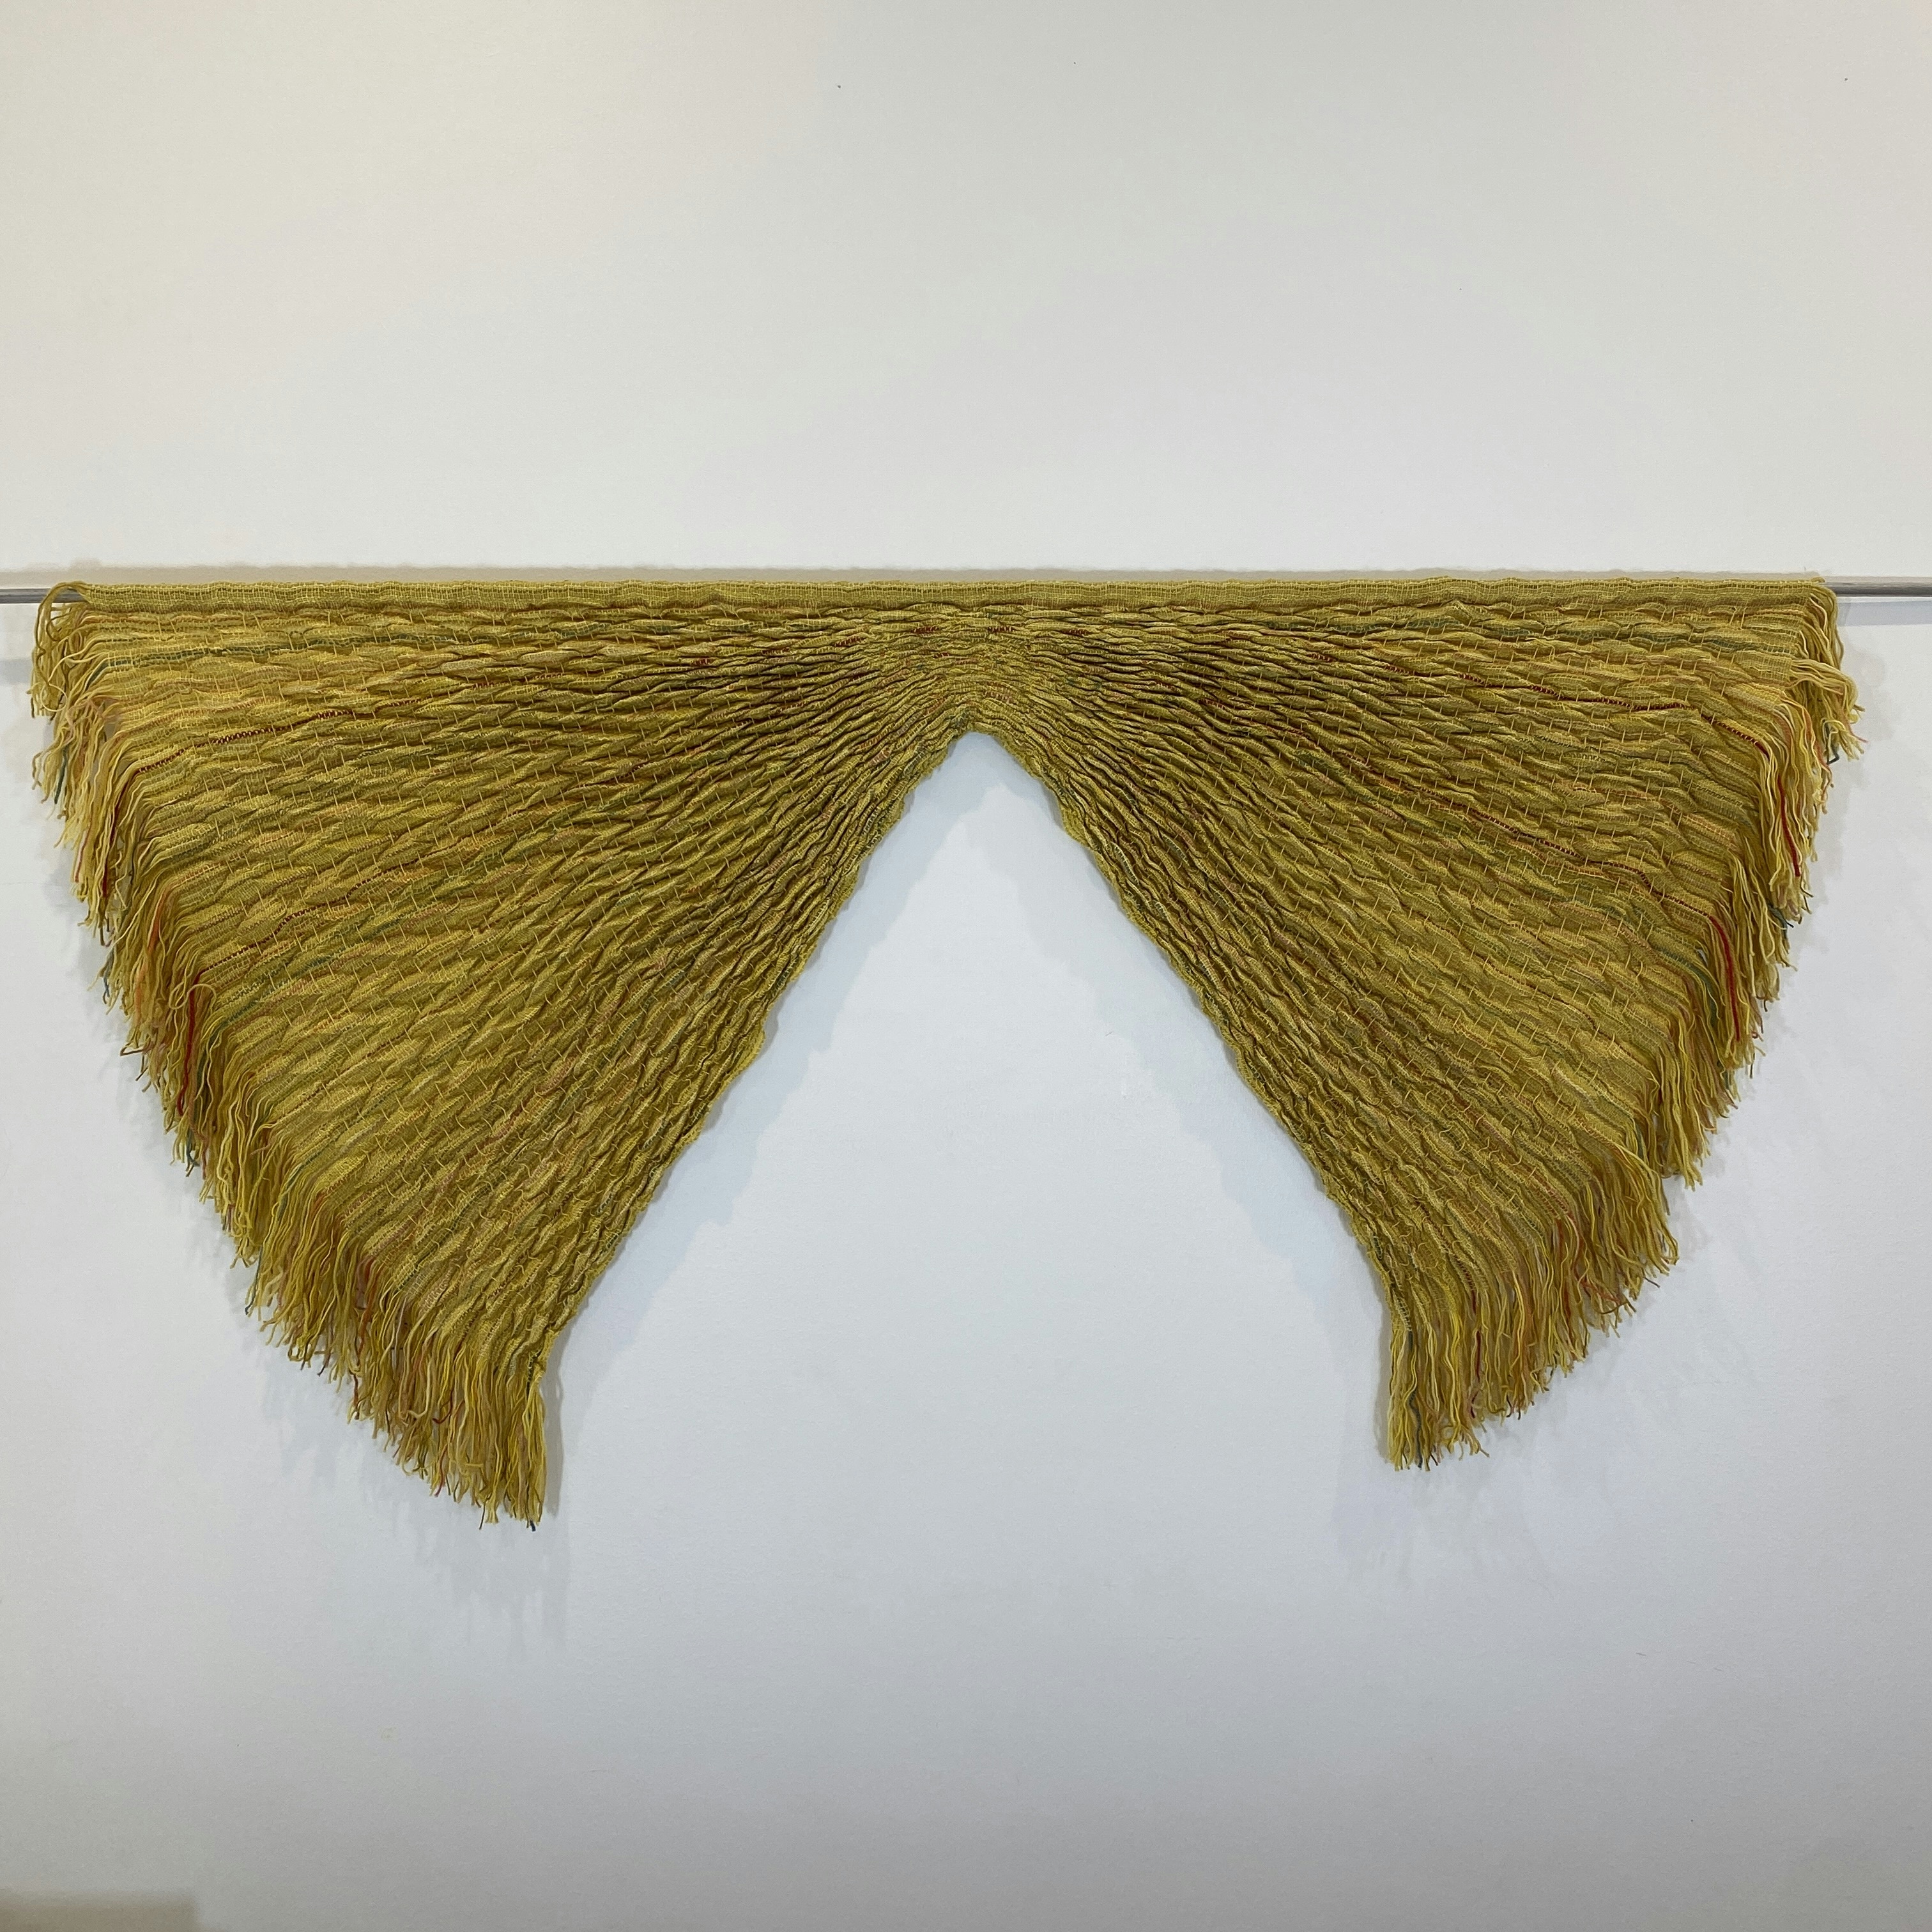 Time for Joy. 2021. Wool, natural dyes. Handwoven. 150 x 80 cm